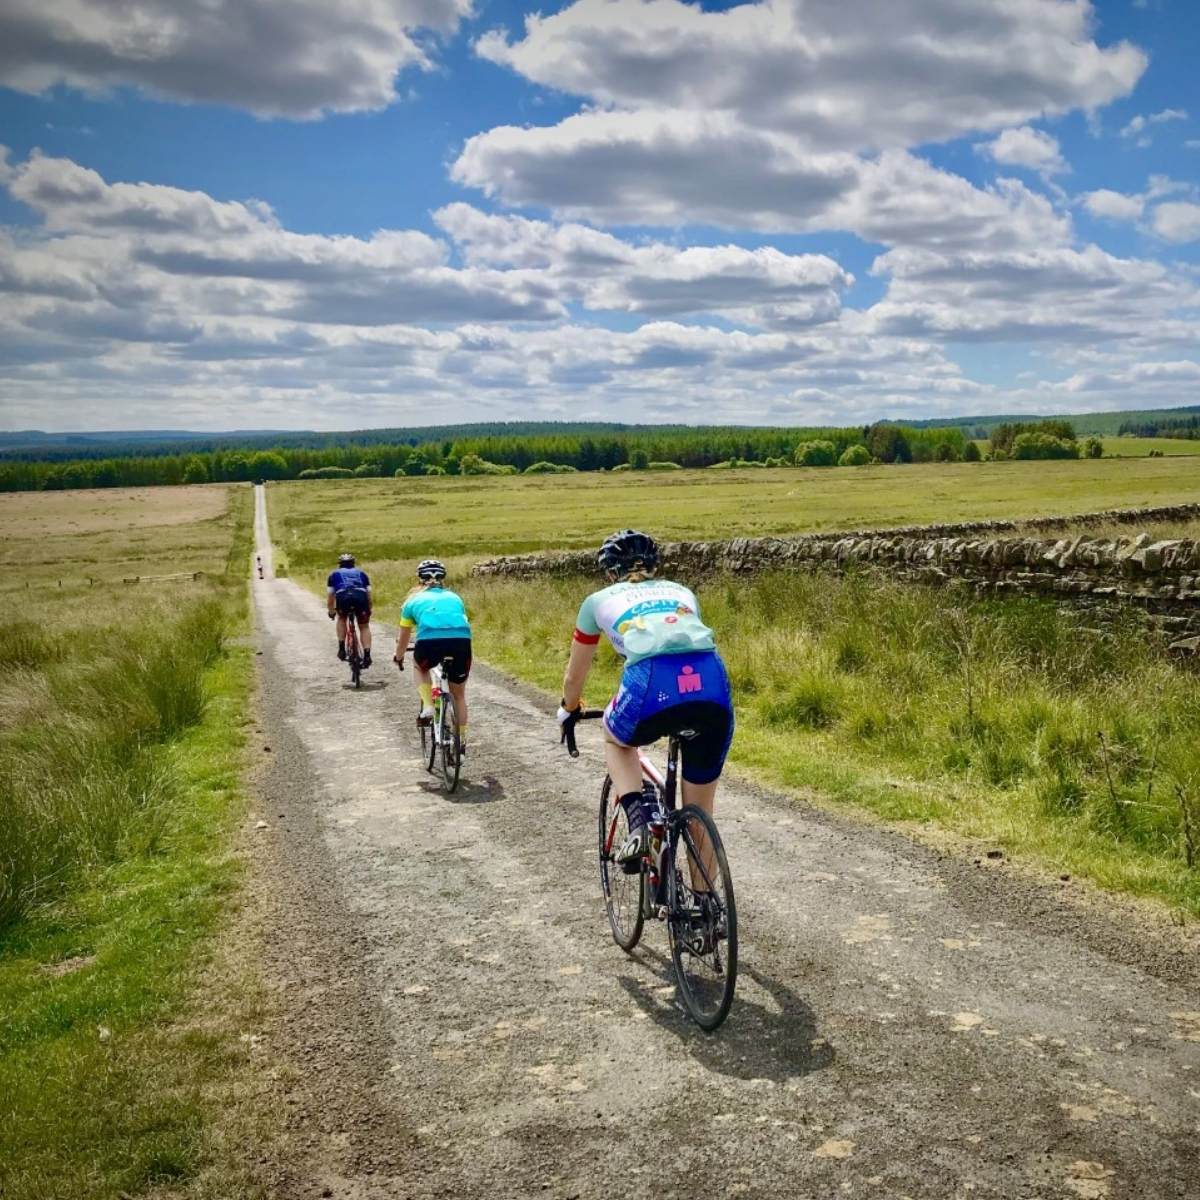 Enter the Cyclone Challenge Rides on Saturday 6th July and take yourself into a landscape made for cycling - cyclonecycling.com #cycling #cyclinglife #sportive #cyclosportive #cyclingphotos #roadbike #cyclist #bicycle #roadcycling #instacycling #strava #fromwhereiride